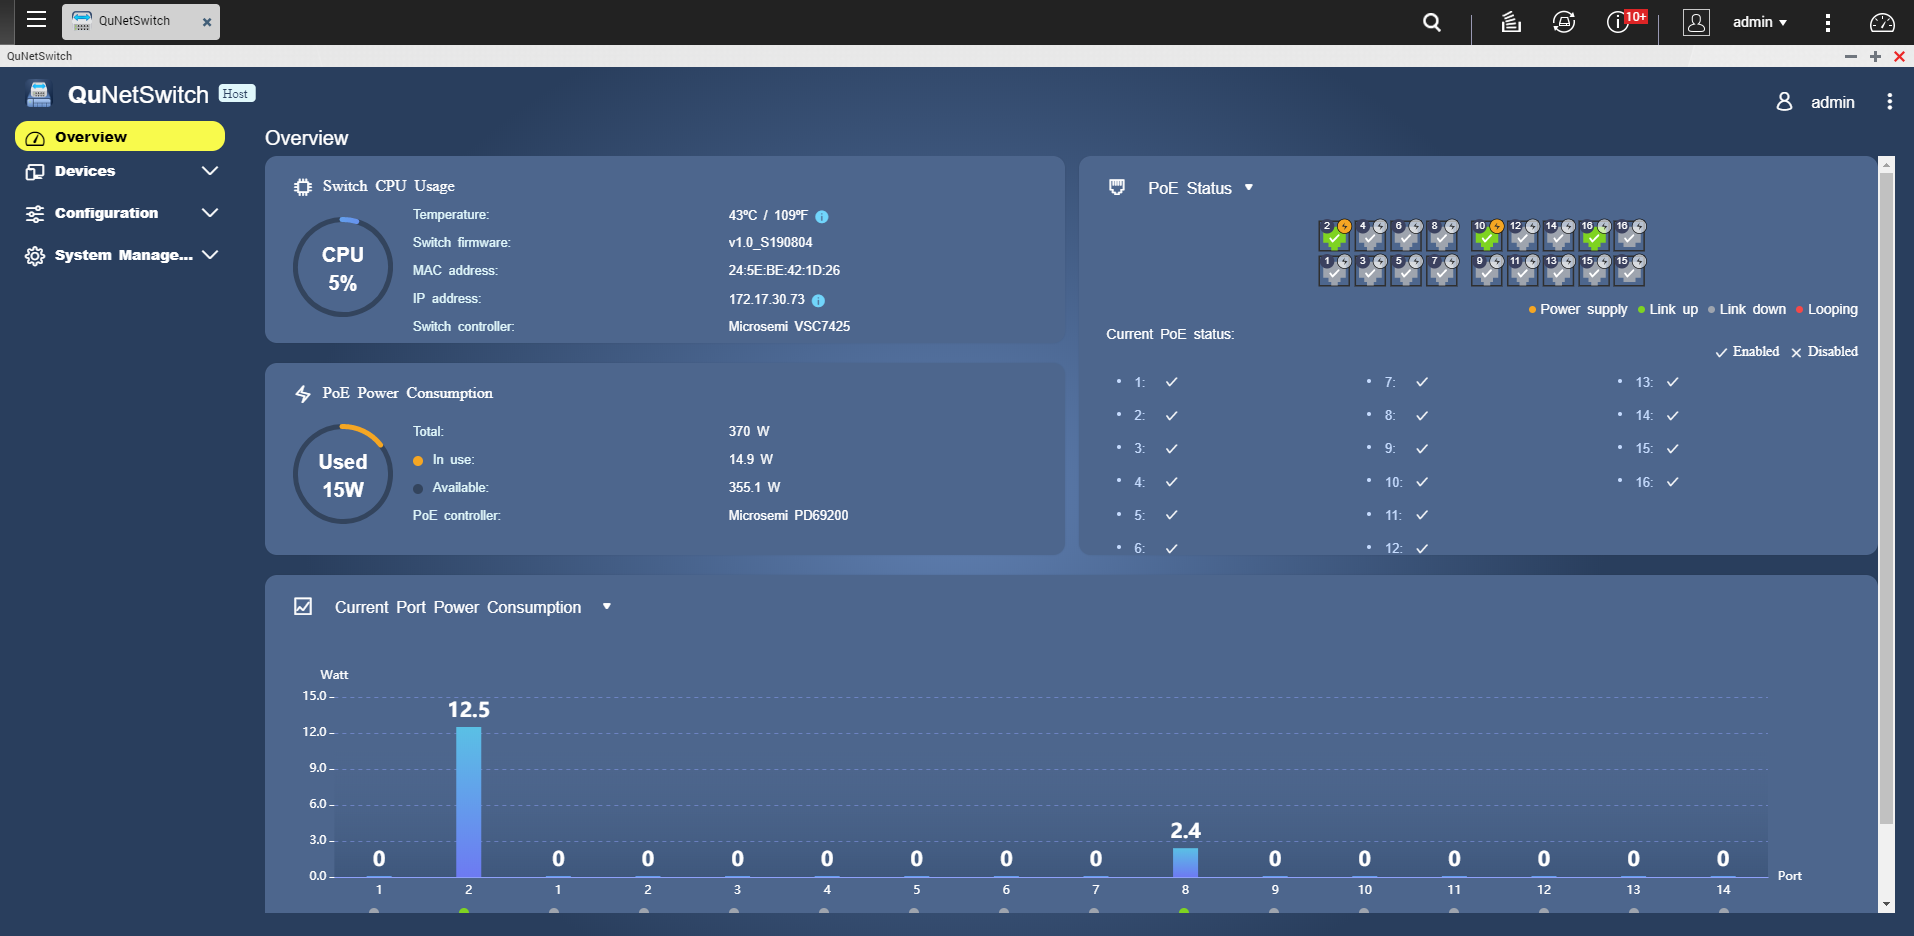 Overview Dashboard View real-time information about switch CPU usage, PoE power consumption, and port status.